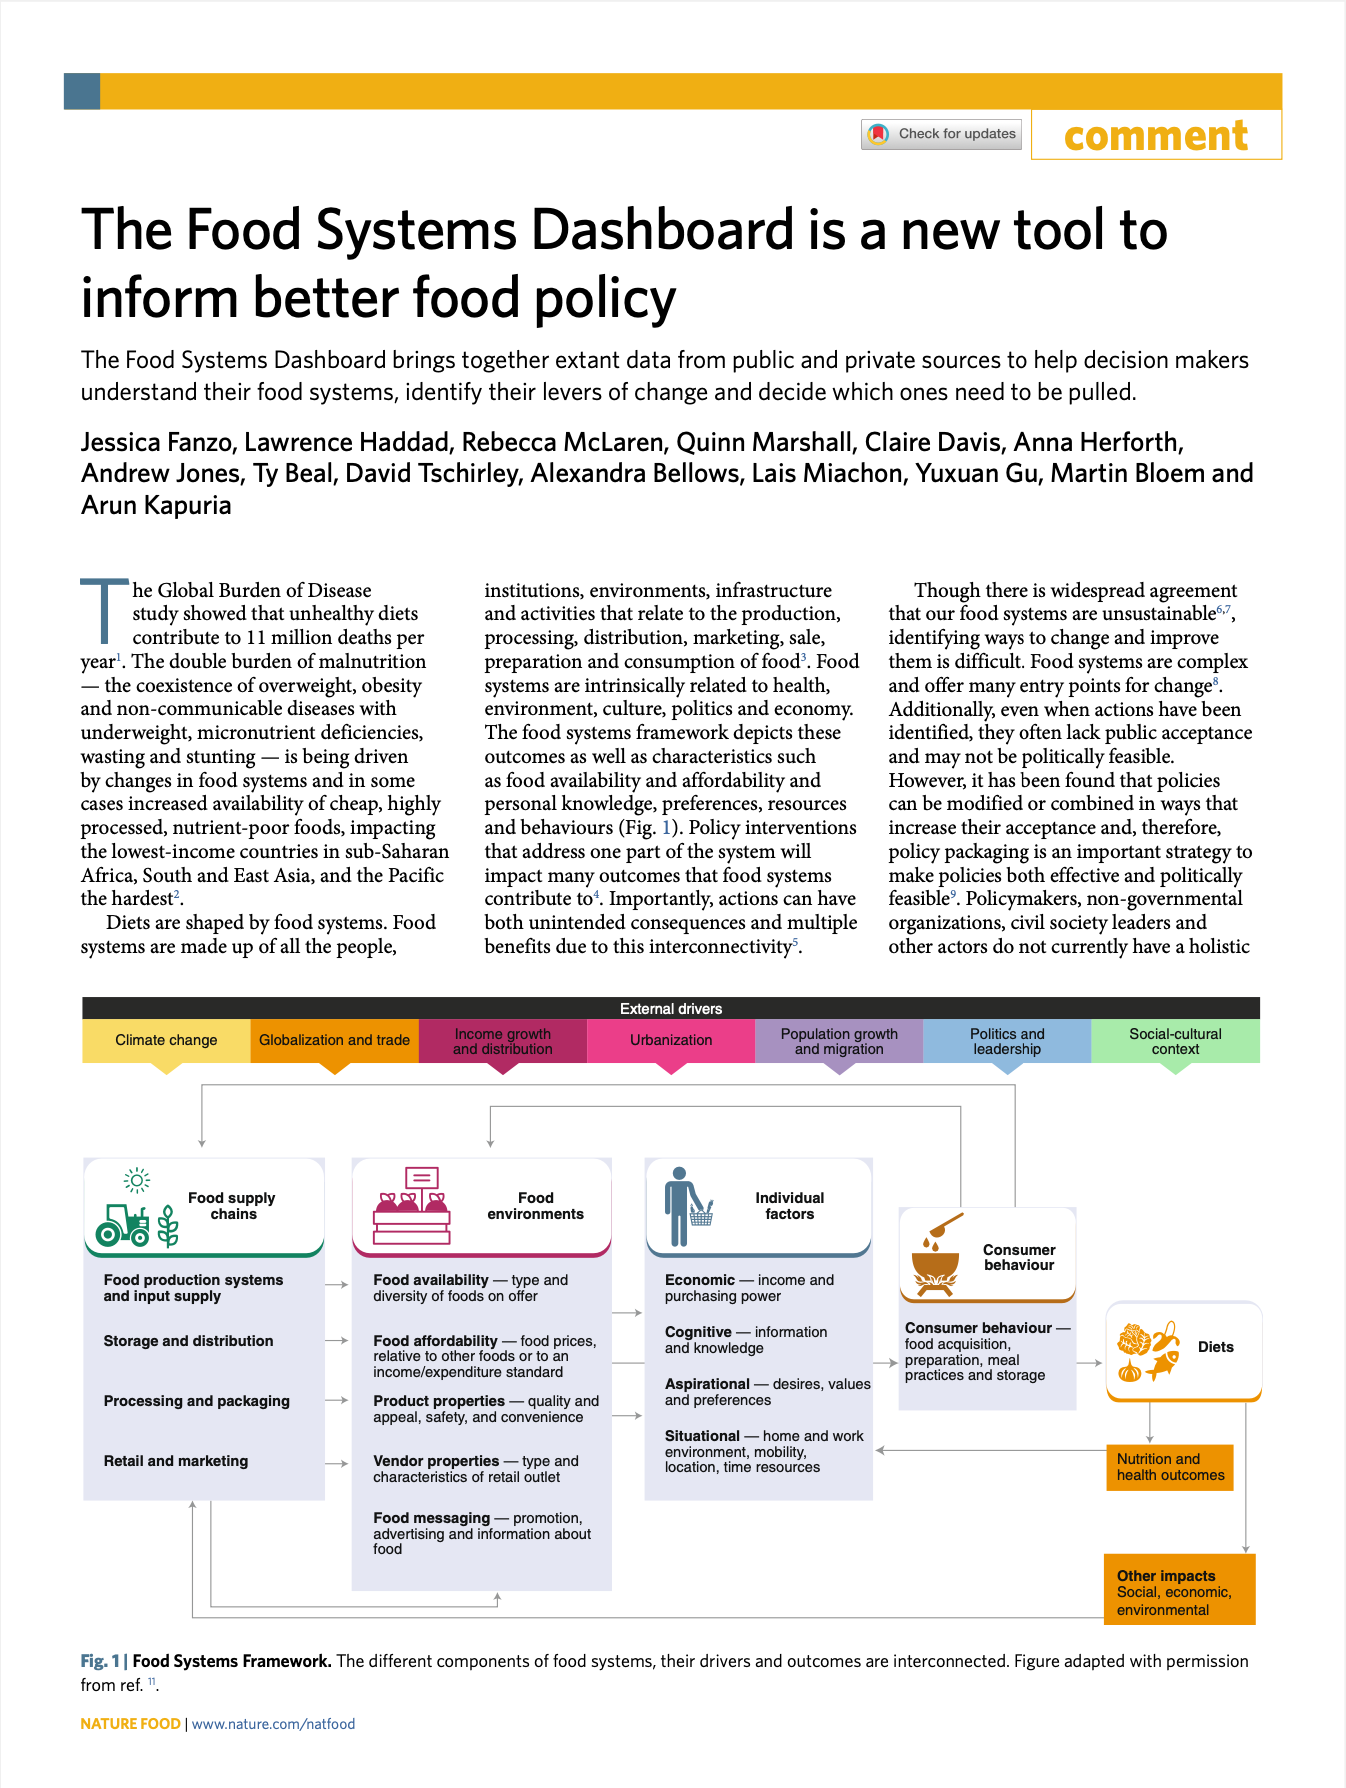 The Food Systems Dashboard is a new tool to inform better food policy